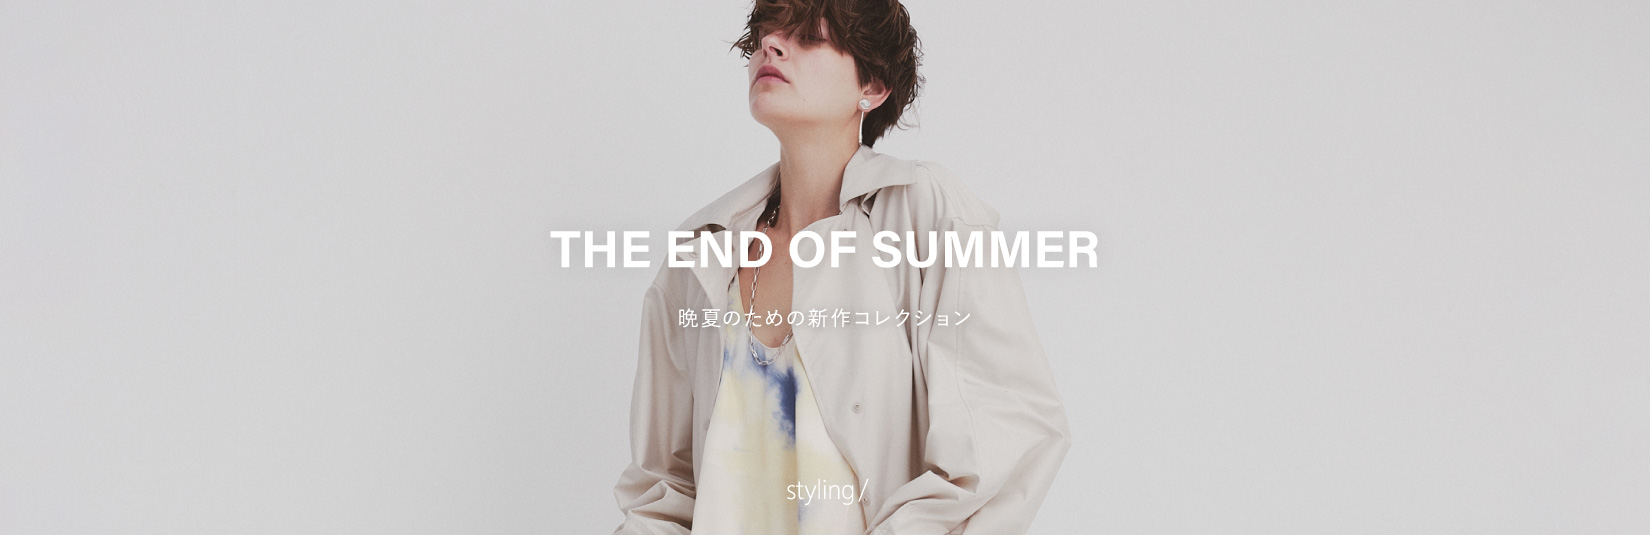 styling/ THE END OF SUMMER